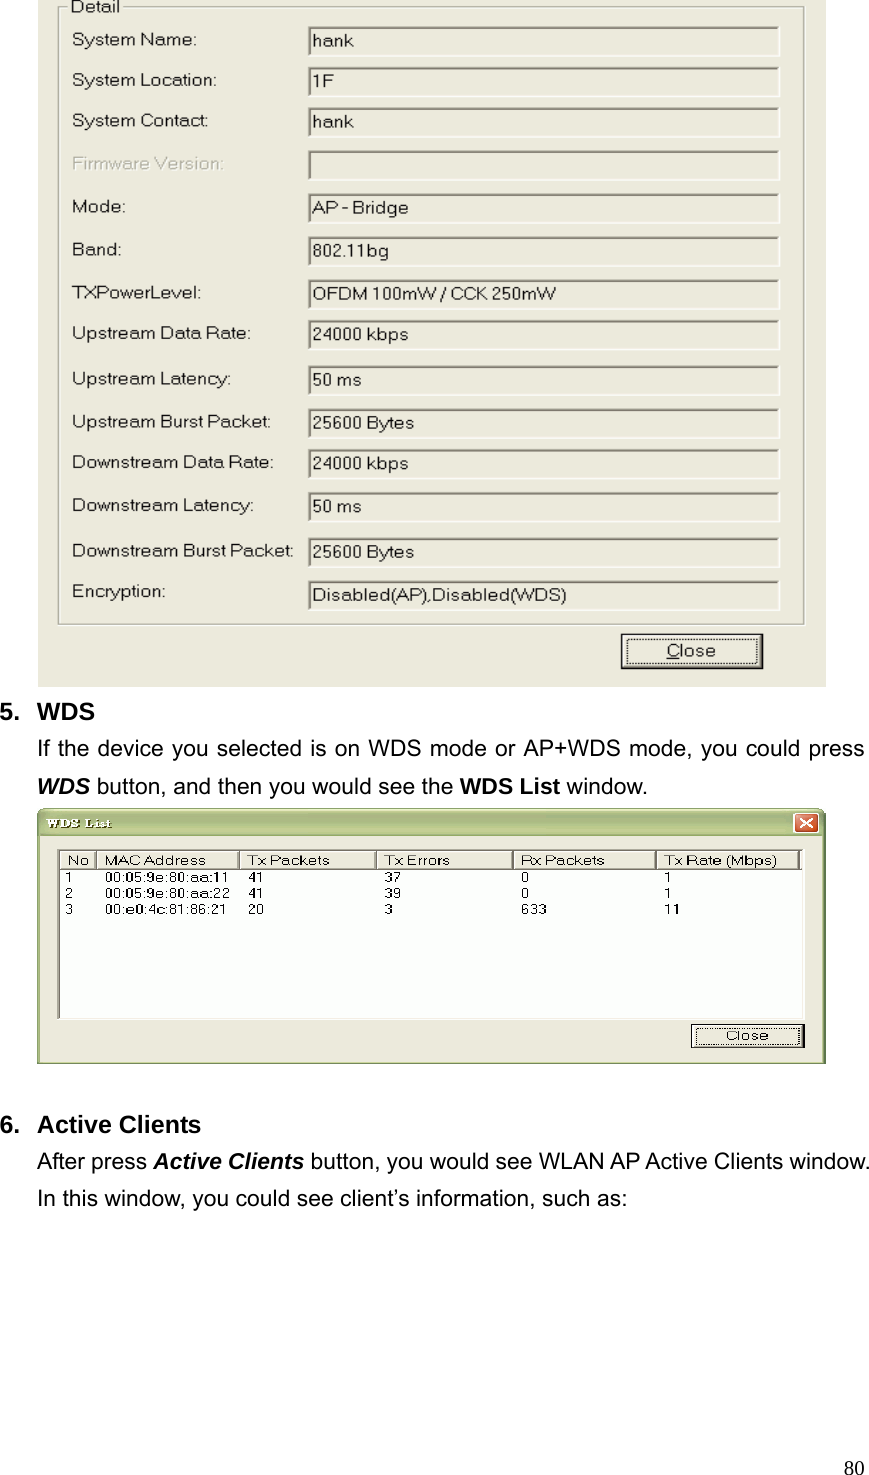  80 5. WDS If the device you selected is on WDS mode or AP+WDS mode, you could press WDS button, and then you would see the WDS List window.   6. Active Clients After press Active Clients button, you would see WLAN AP Active Clients window. In this window, you could see client’s information, such as: 